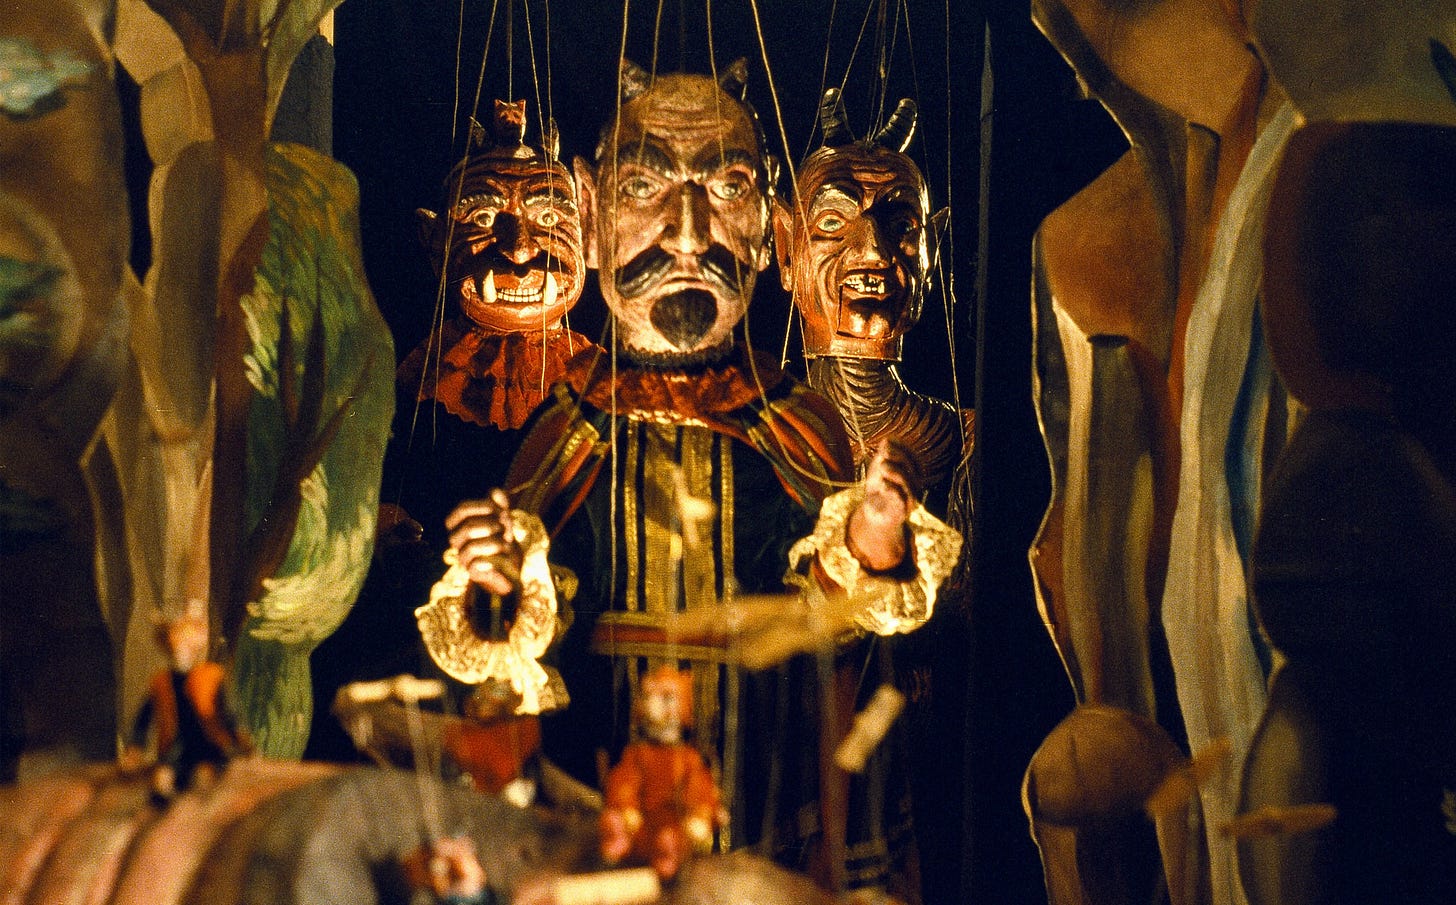 A marionette of the devil in traditional Czech style, flanked by two marionettes of demons.